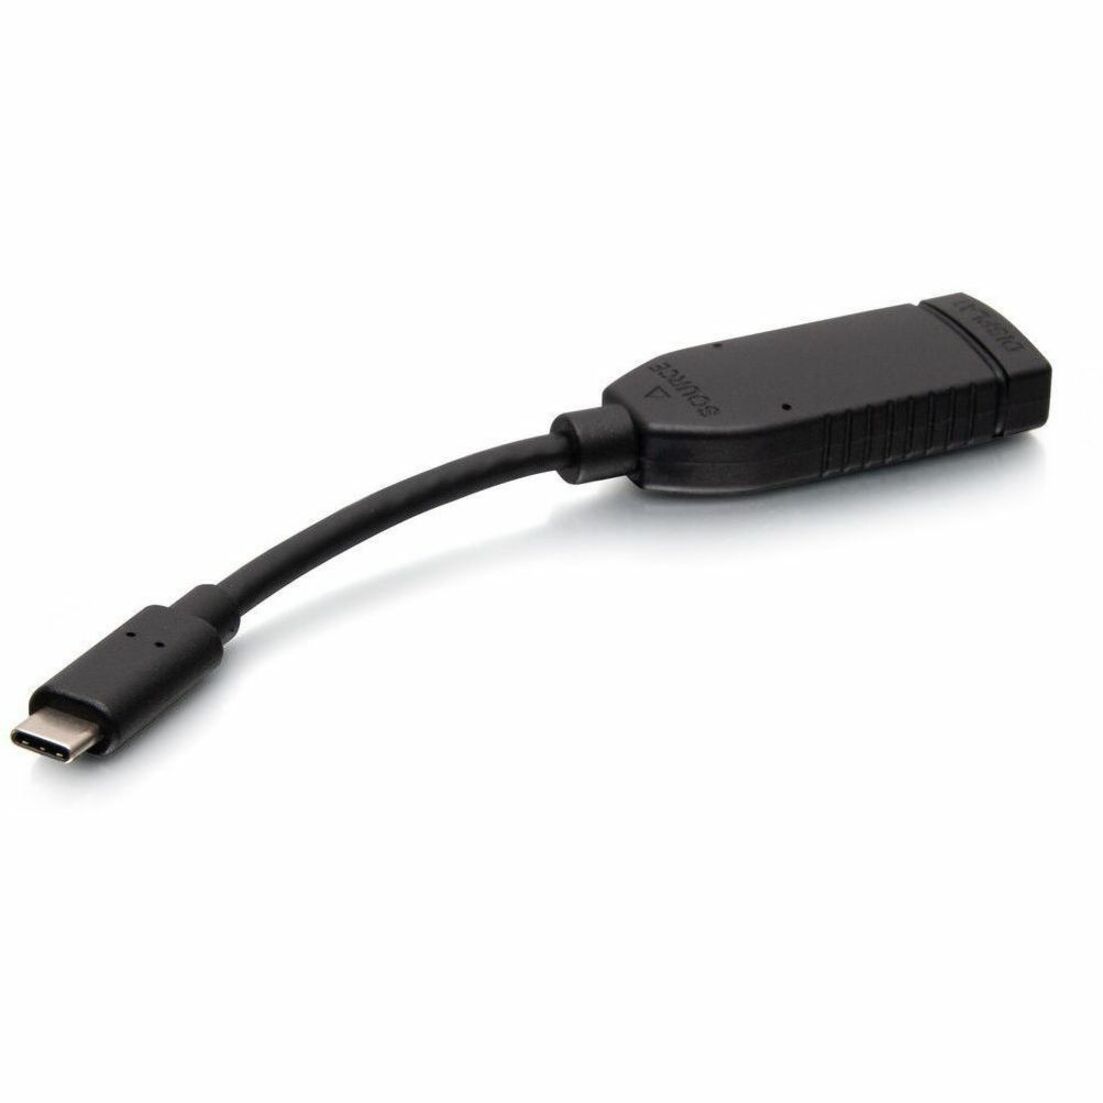 C2G C2G30035 USB-C to HDMI Dongle Adapter Converter, Plug and Play, 3840 x 2160 Resolution Supported